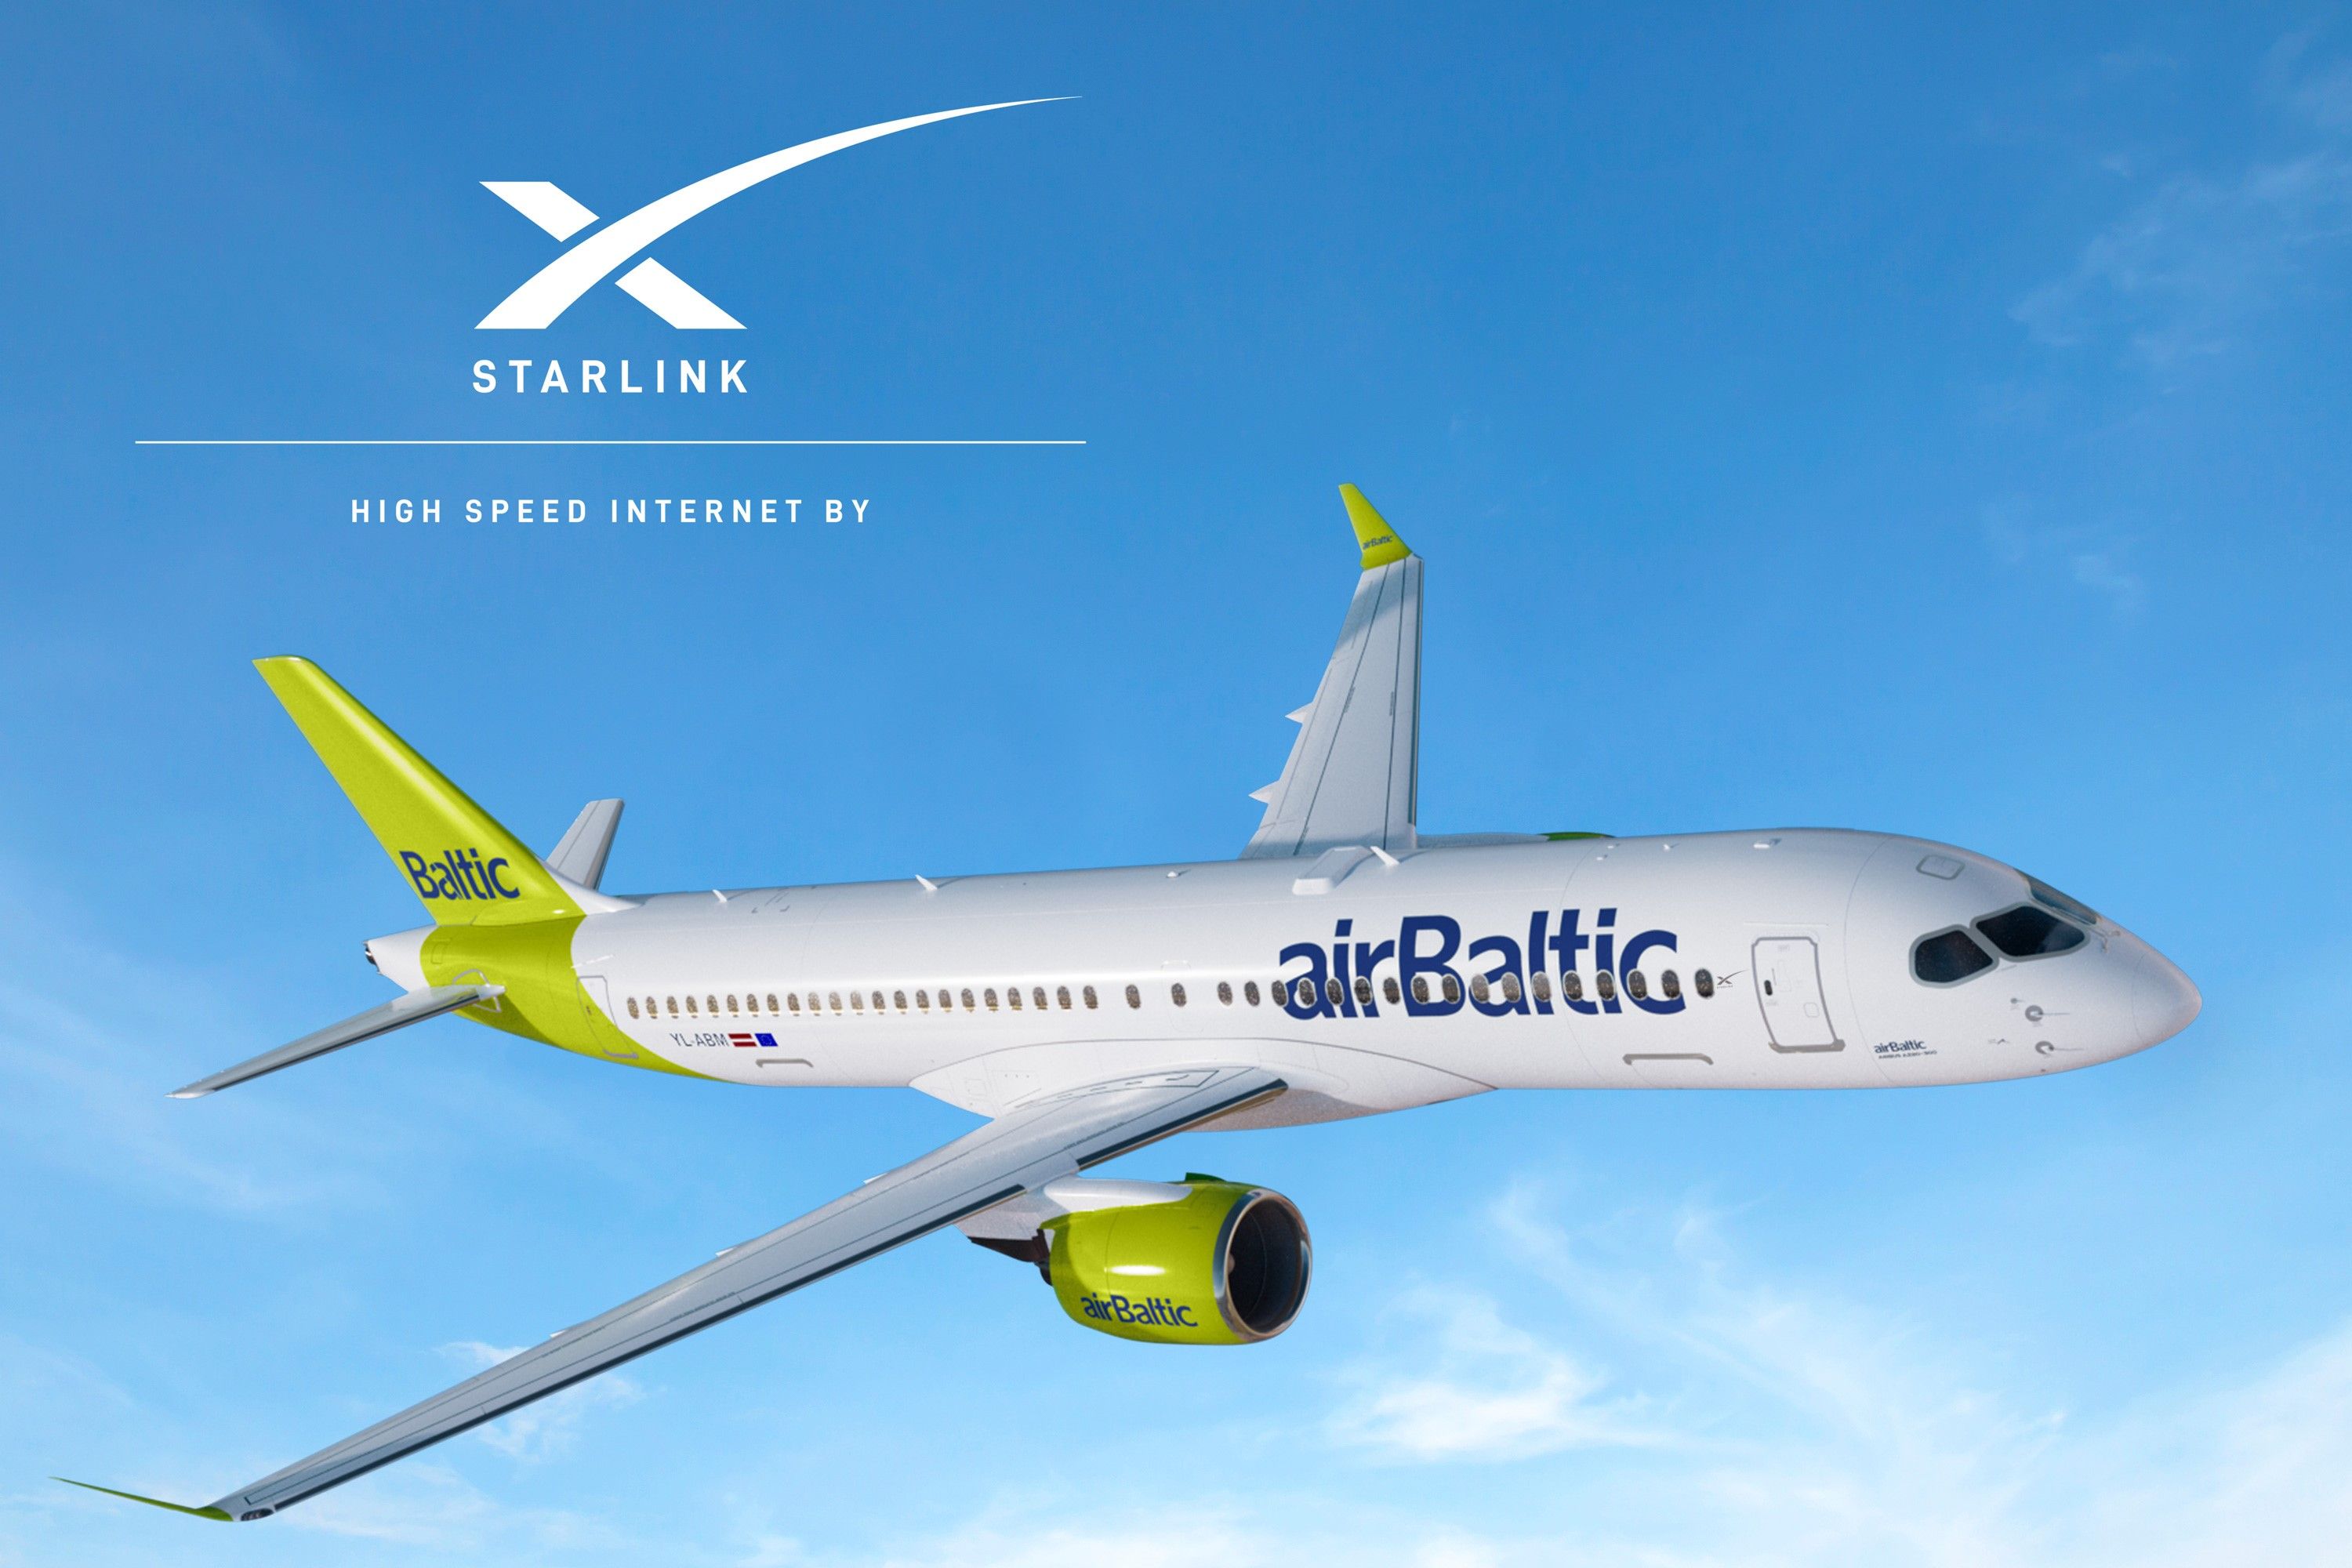 Alan airBaltic aircraft flying in the sky, beneath a Starlink logo.